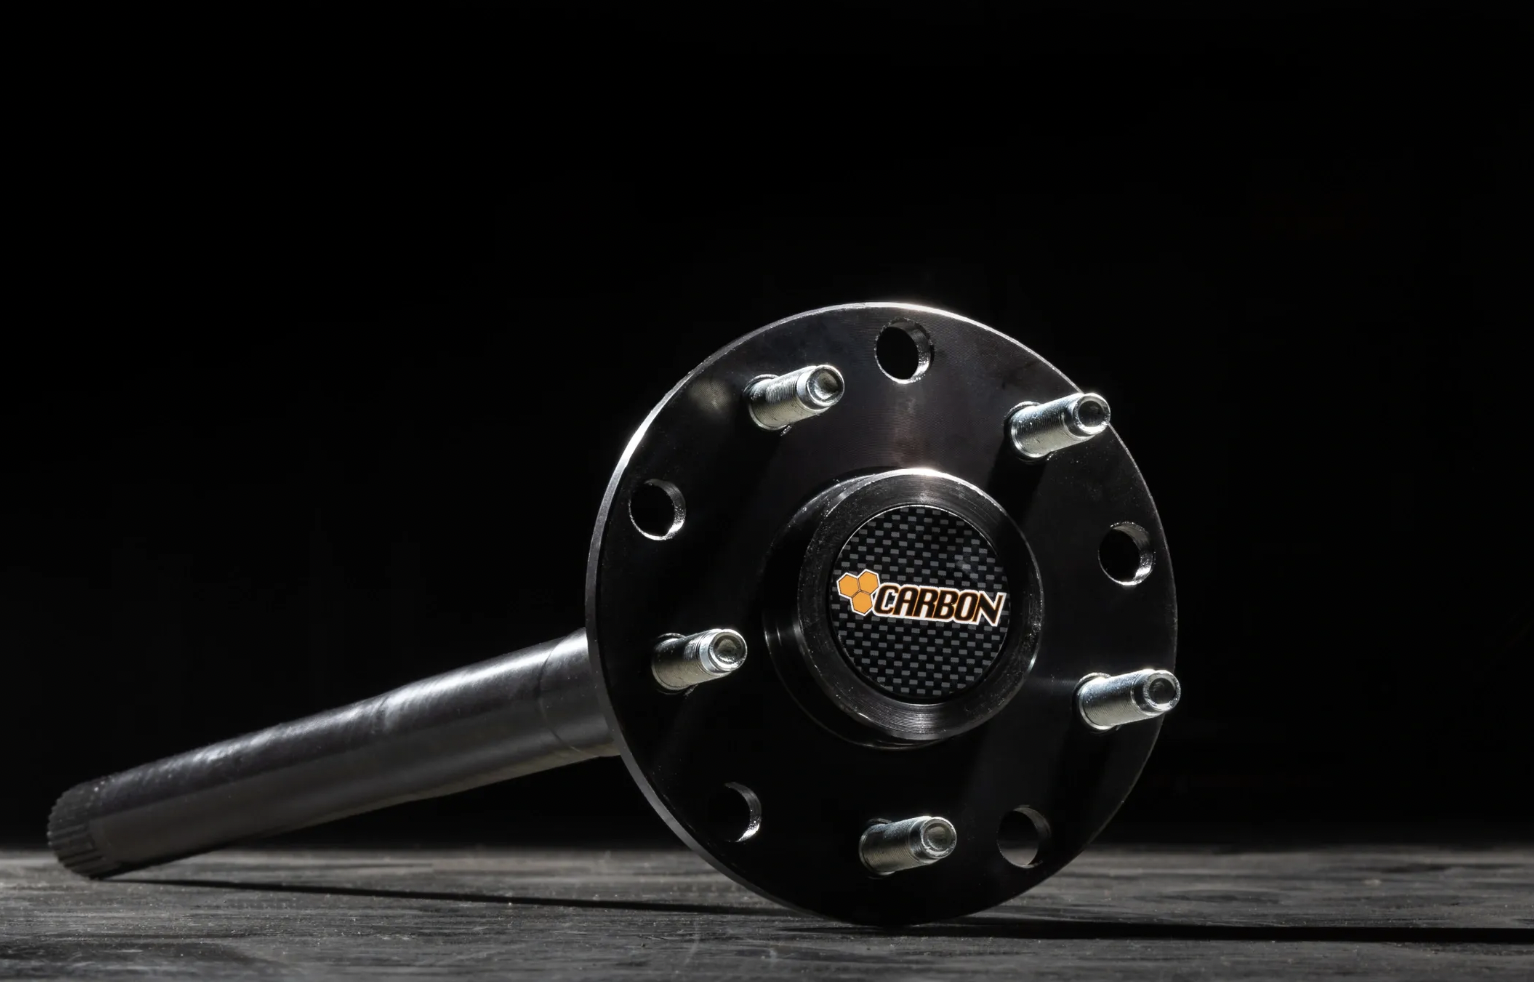 Metalcloak Announces Asset Acquisition of Carbon Gears & Axles, Expanding Its Offering to the Off Road Community